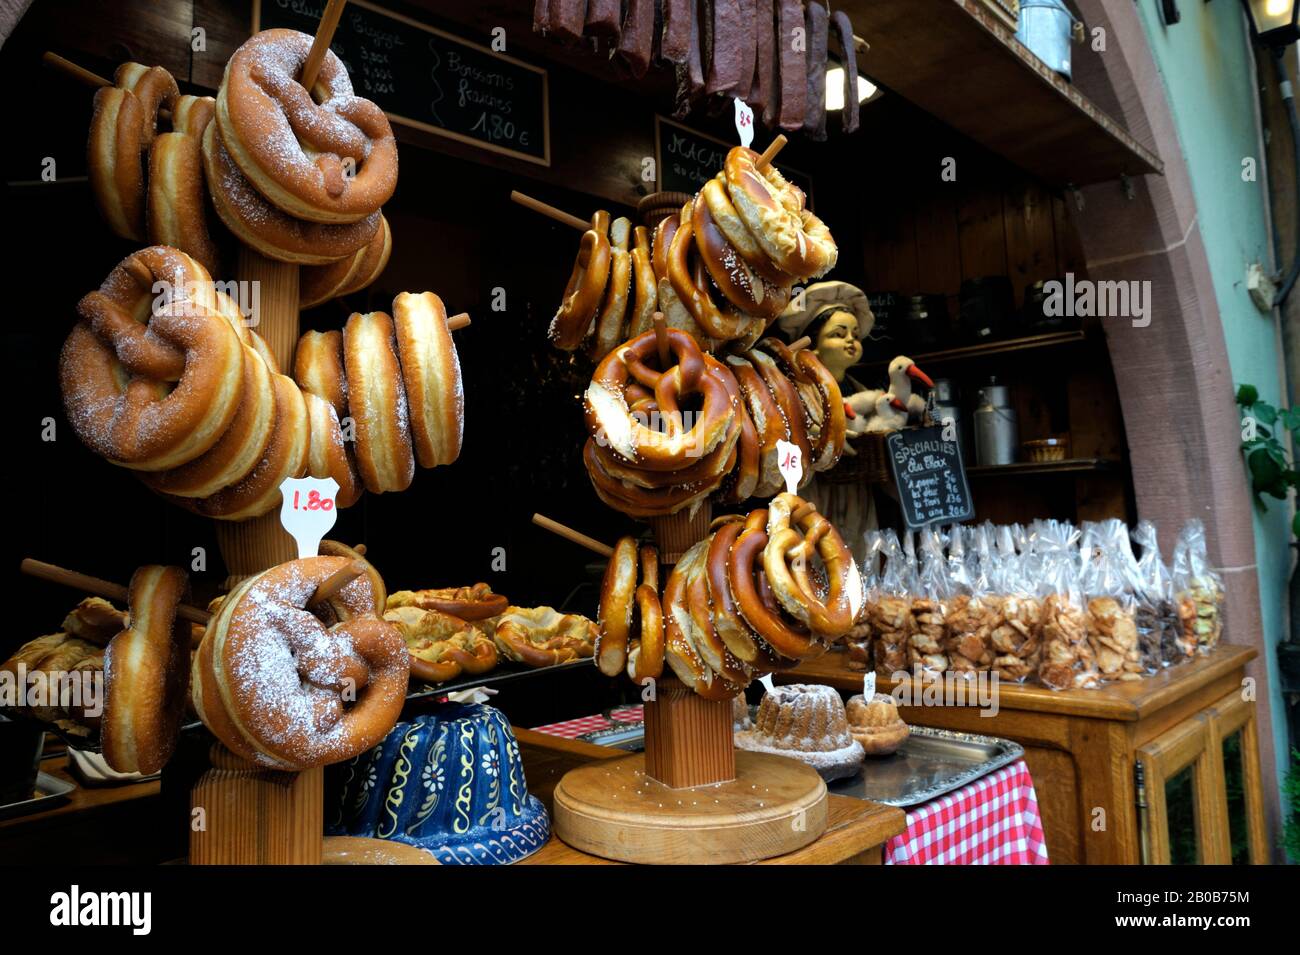 FRANCE, ALSACE, MEDIEVAL TOWN OF RIQUEWIHR, STORE SELLING PRETZELS, MACARONES AND KUGELHOPF Stock Photo